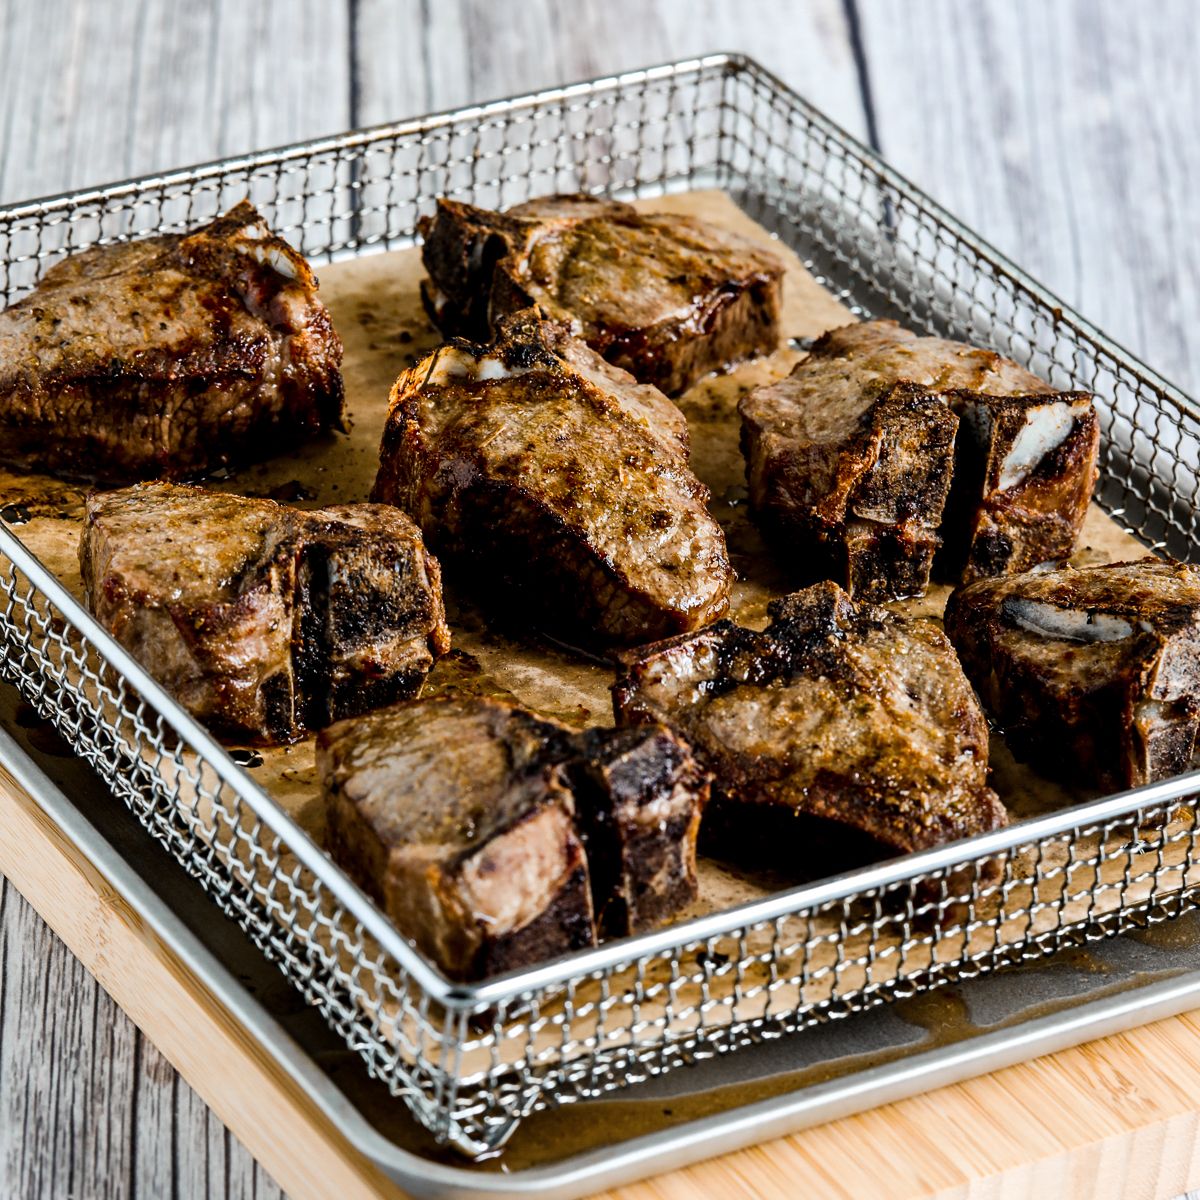 Square image of Lamb Chops shown in Air Fryer basket.